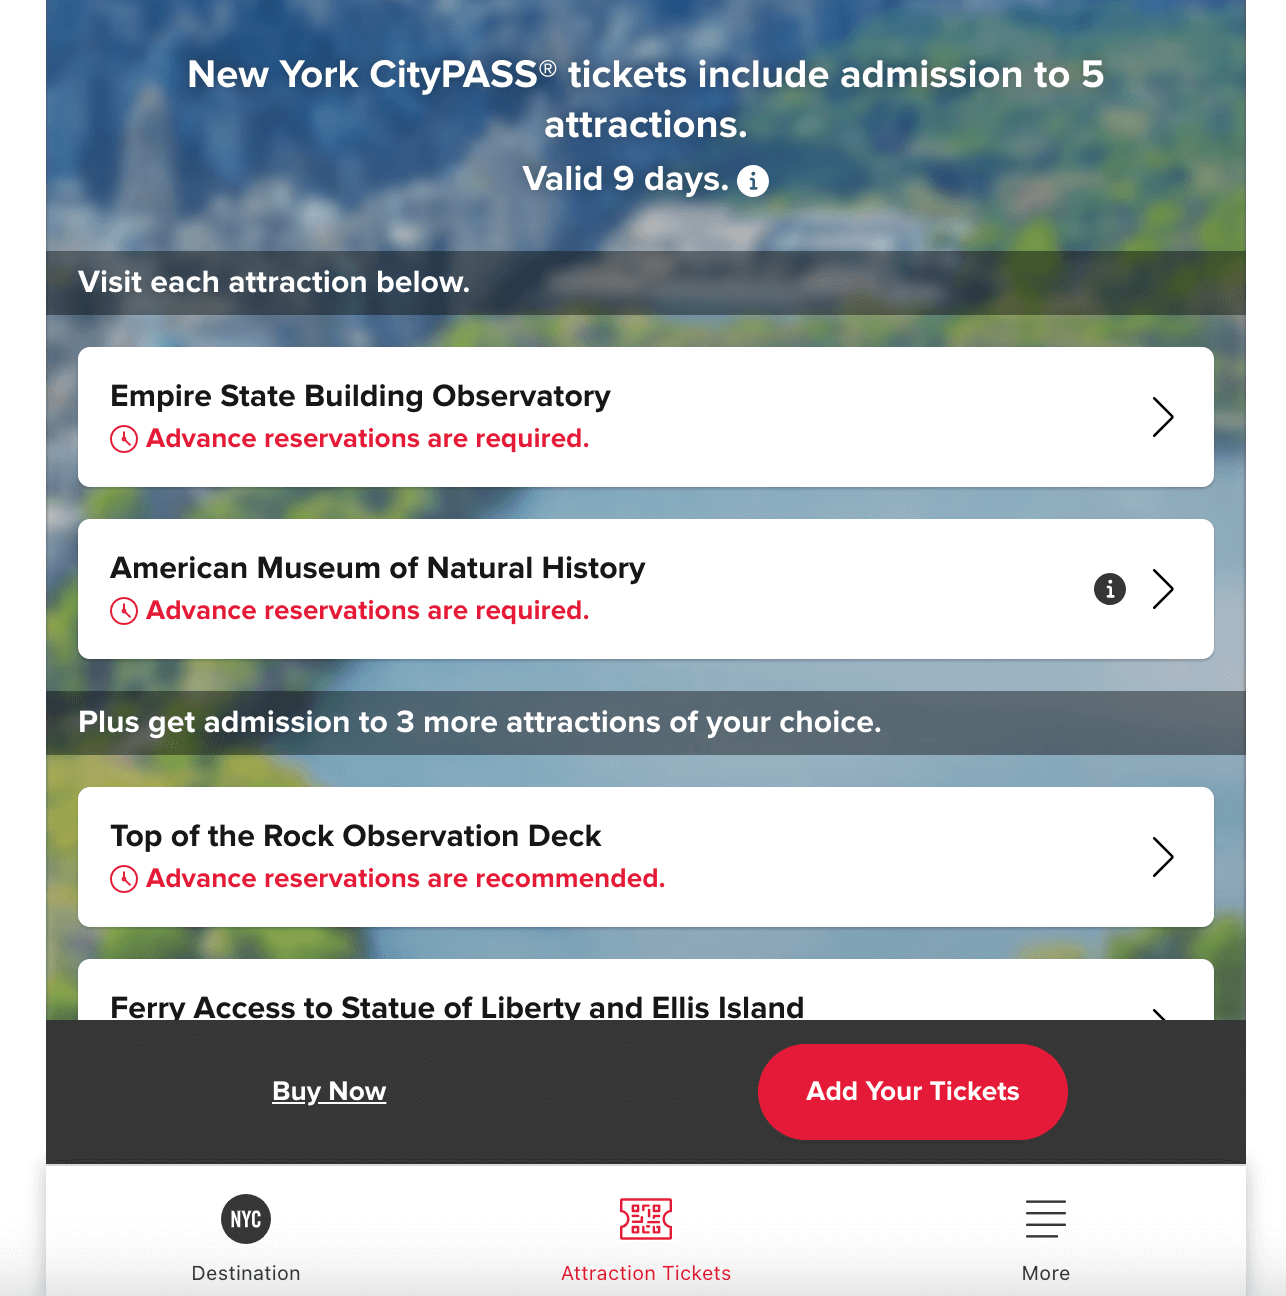 How to make New York CityPASS reservations